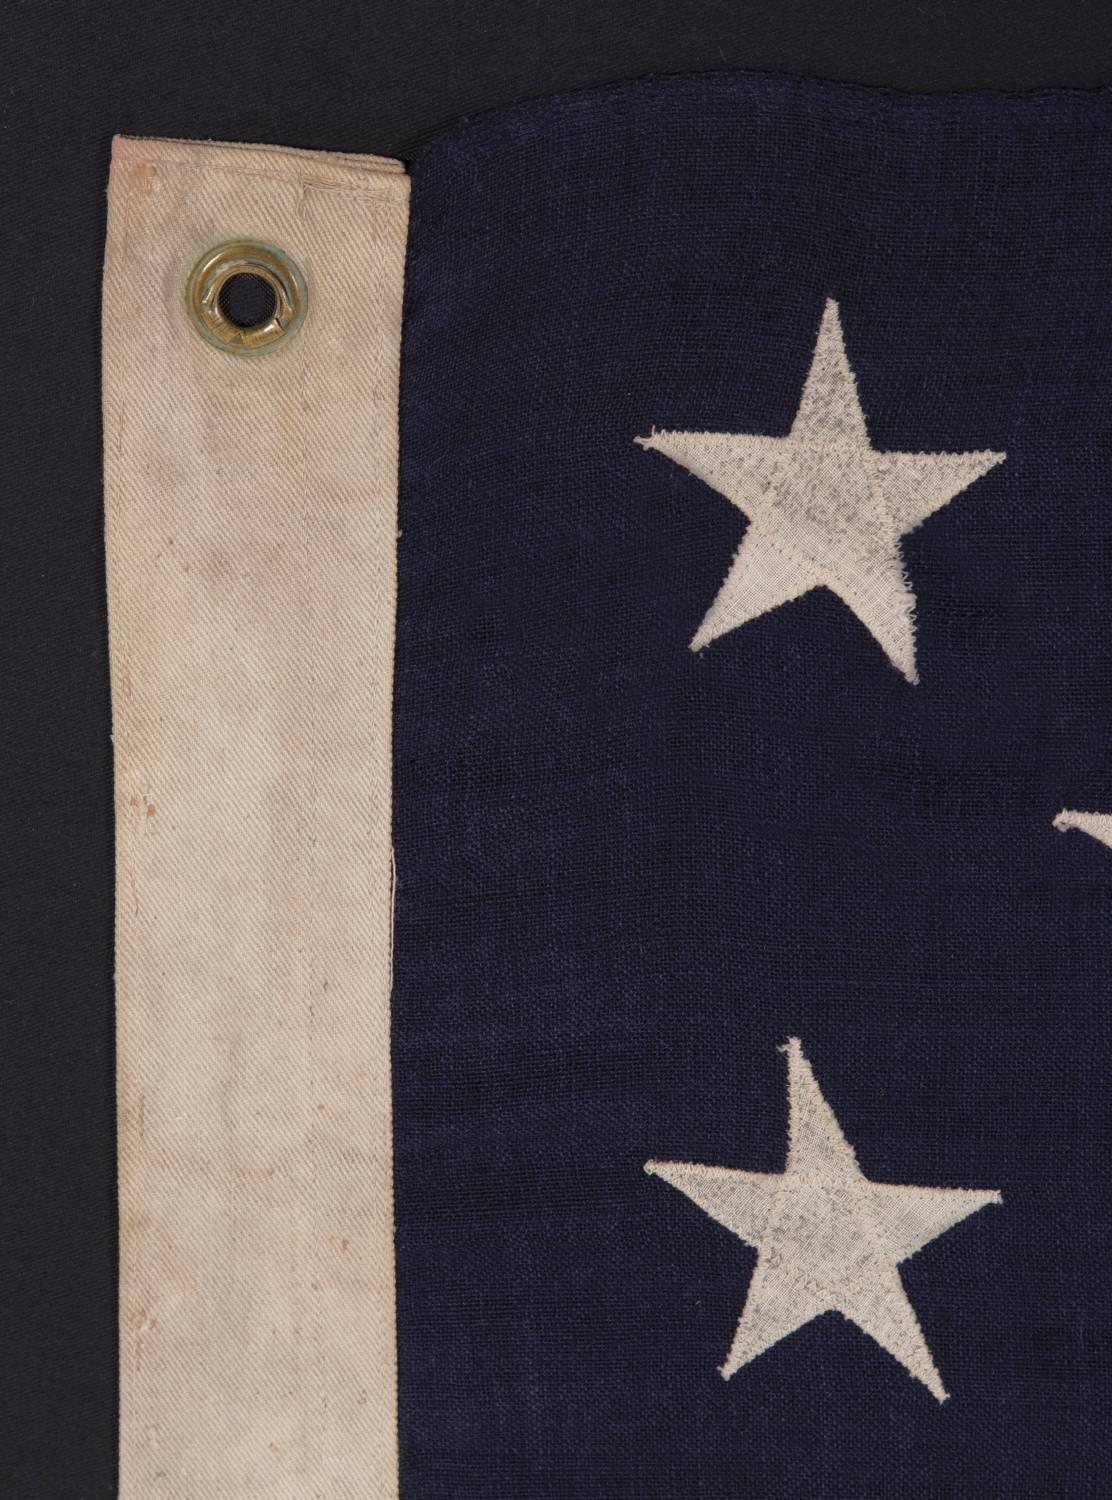 19th Century 13 Stars Arranged in a 3-2-3-2-3 Pattern on a Small-Scale Antique Flag